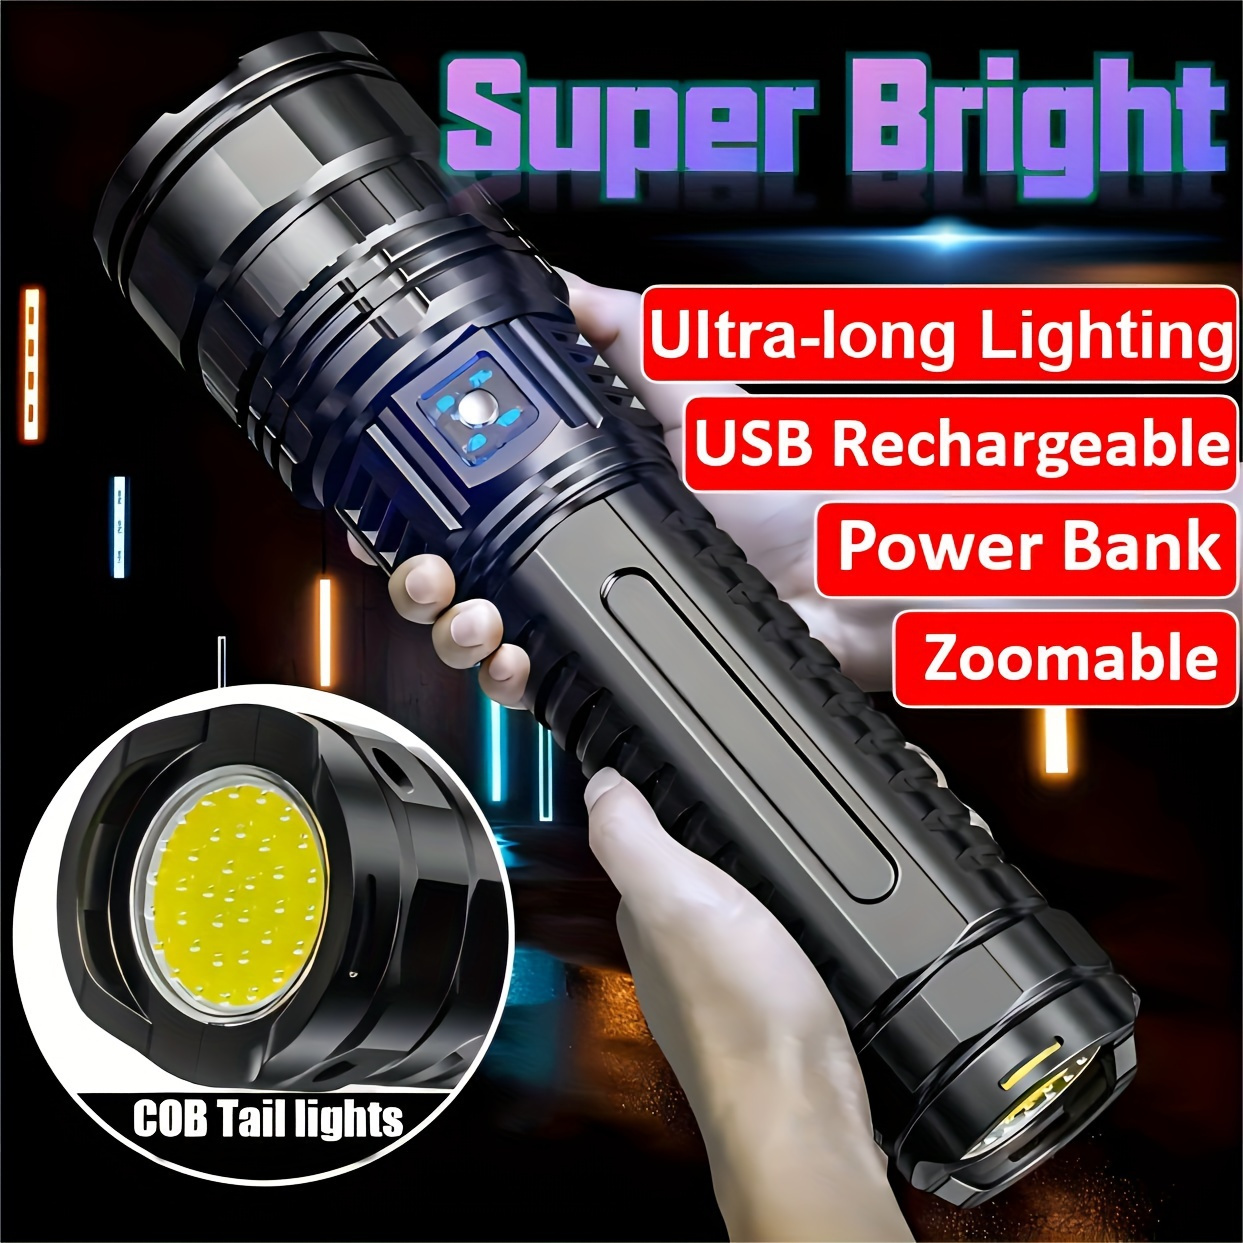 

Ultra-bright Led Flashlight With Usb Rechargeable Battery - Powerful Searchlight, Zoomable Cob Tail Light For Camping, Hunting, Hiking & Emergency Adventures